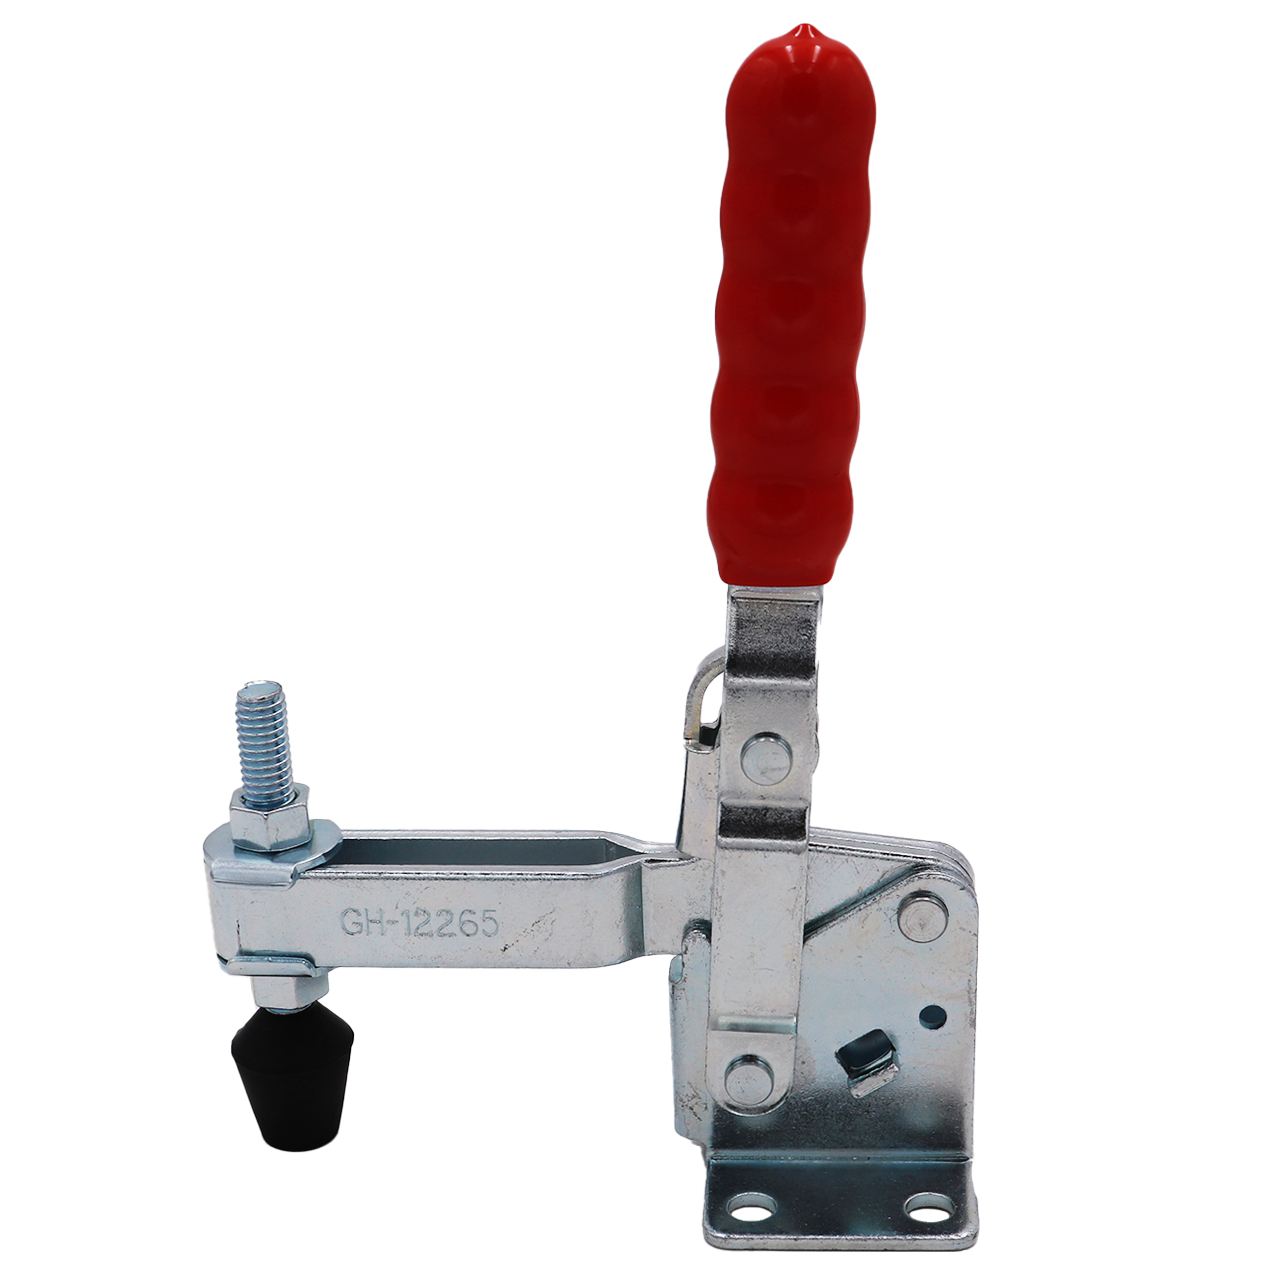 750LB Toggle Clamp, Vertical Handle